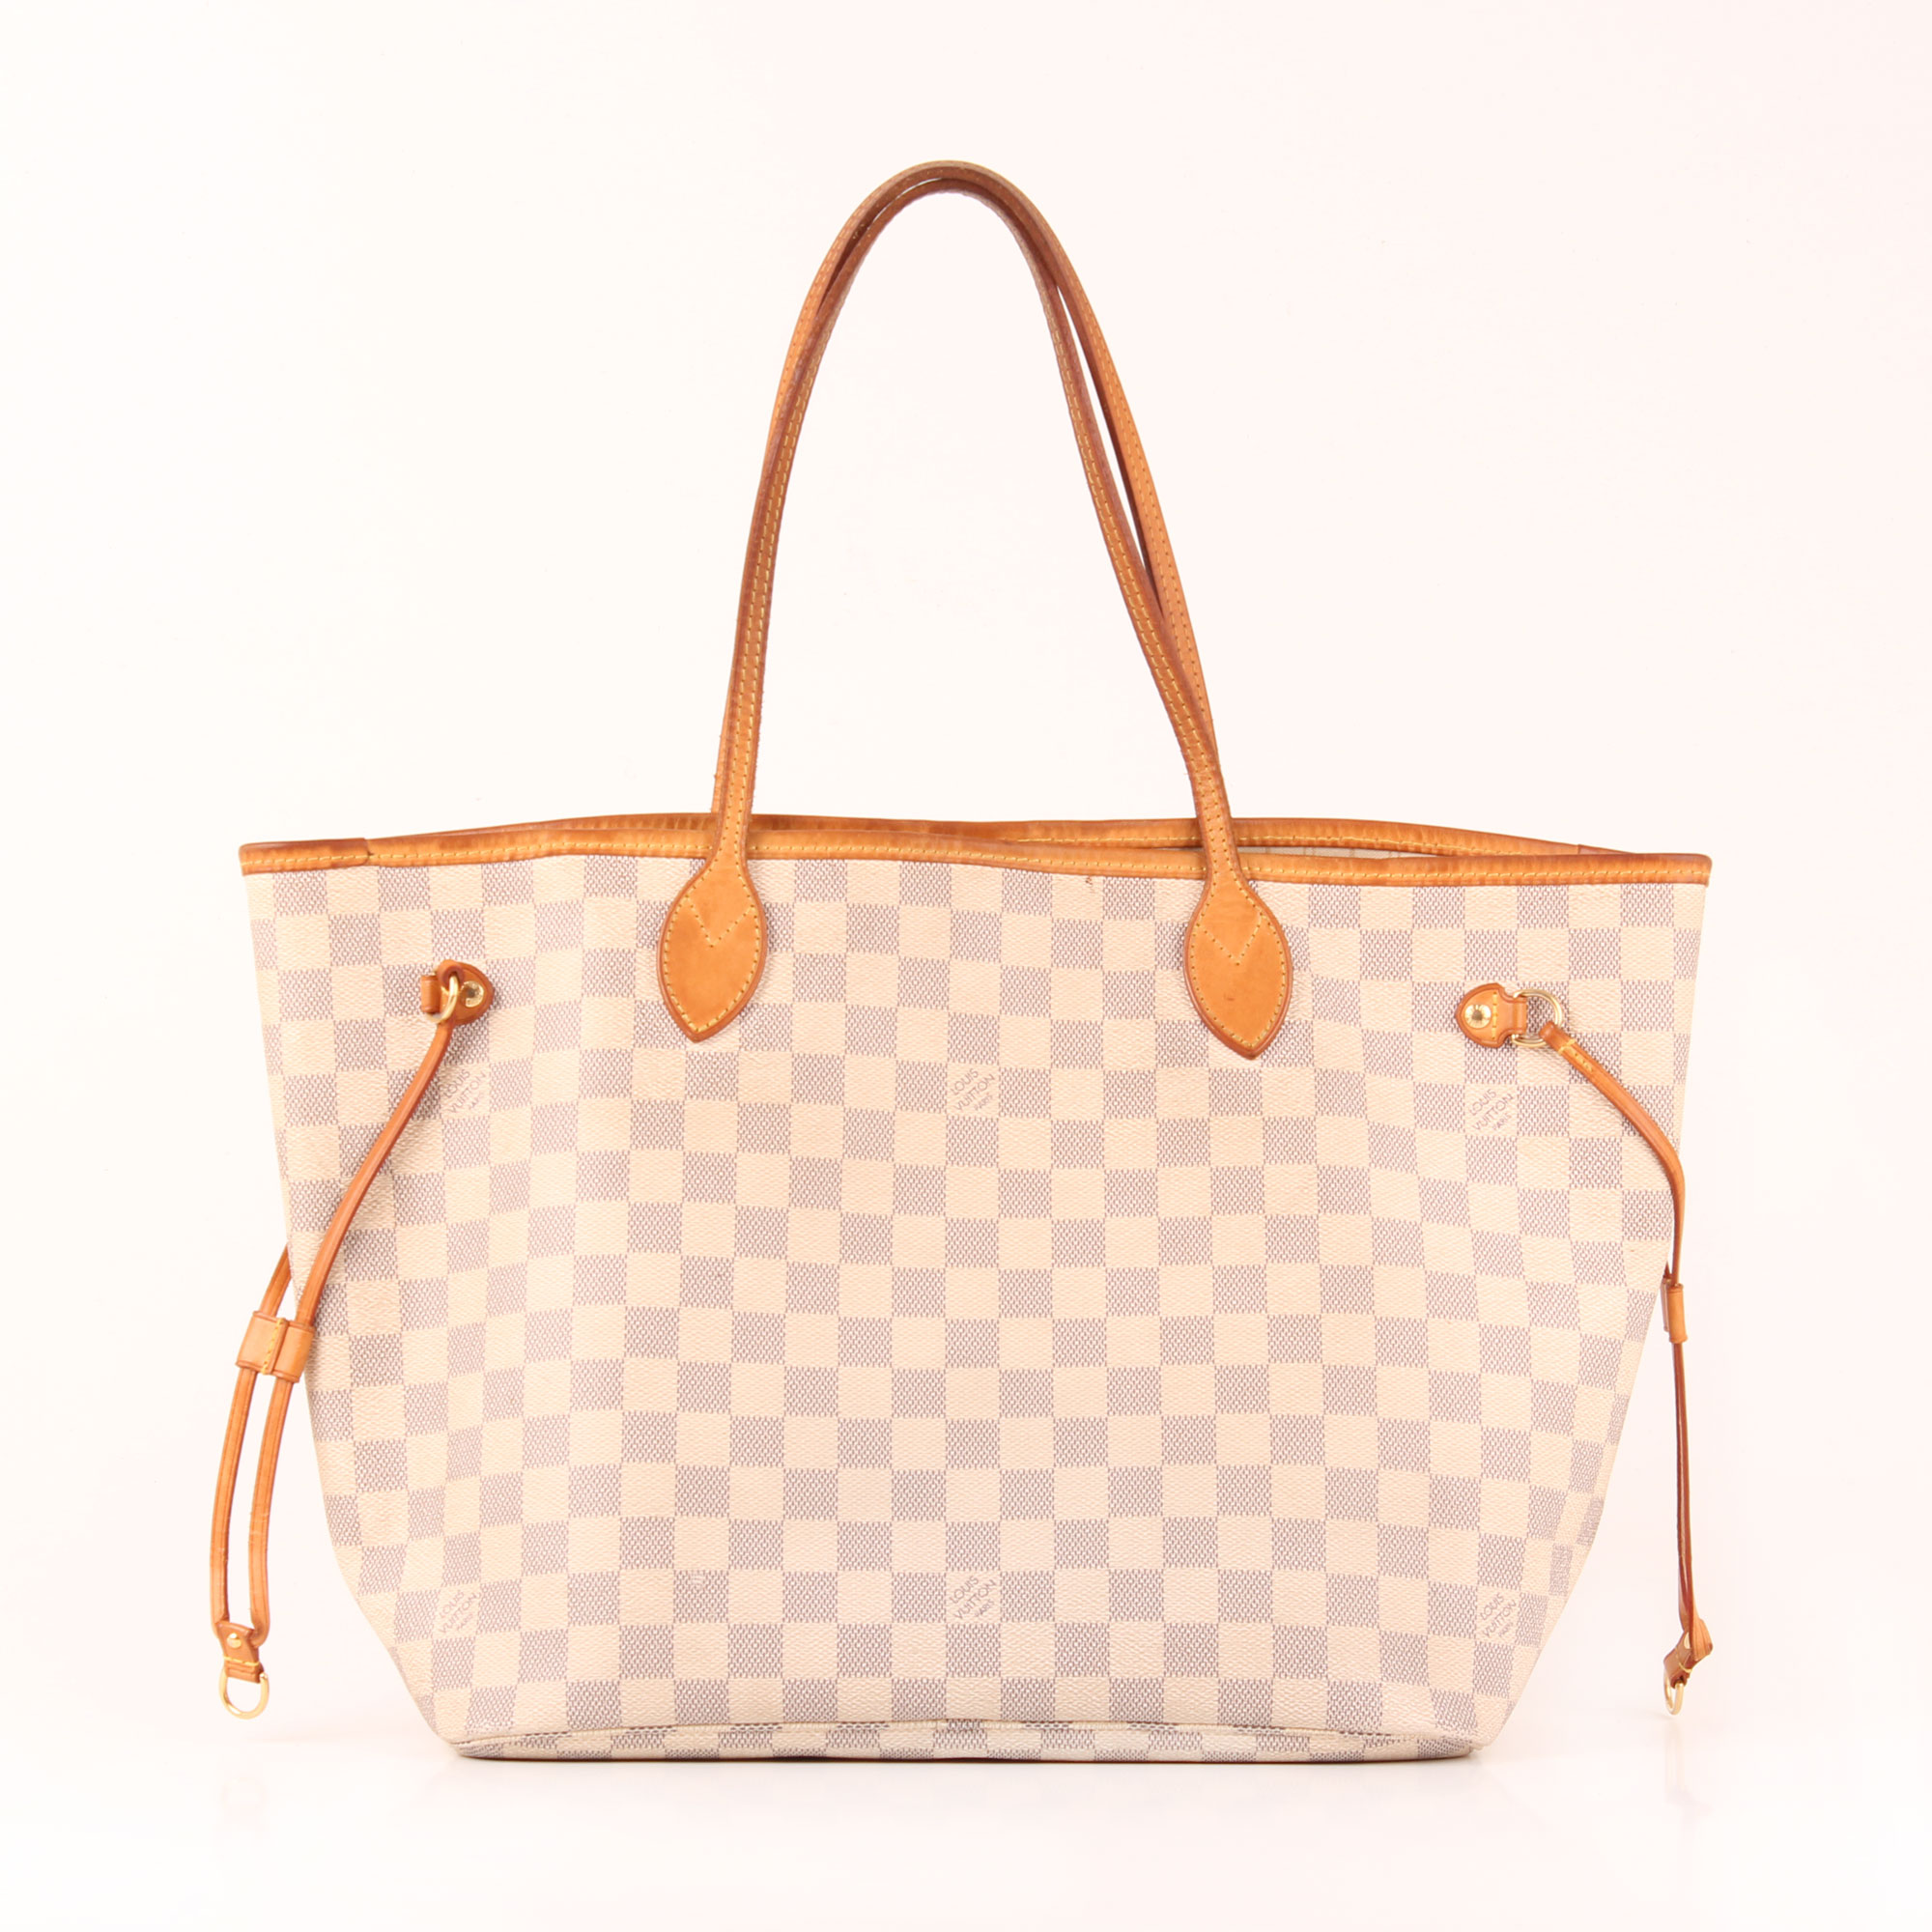 Bolso Louis Vuitton Modelo Neverfull | Confederated Tribes of the Umatilla Indian Reservation